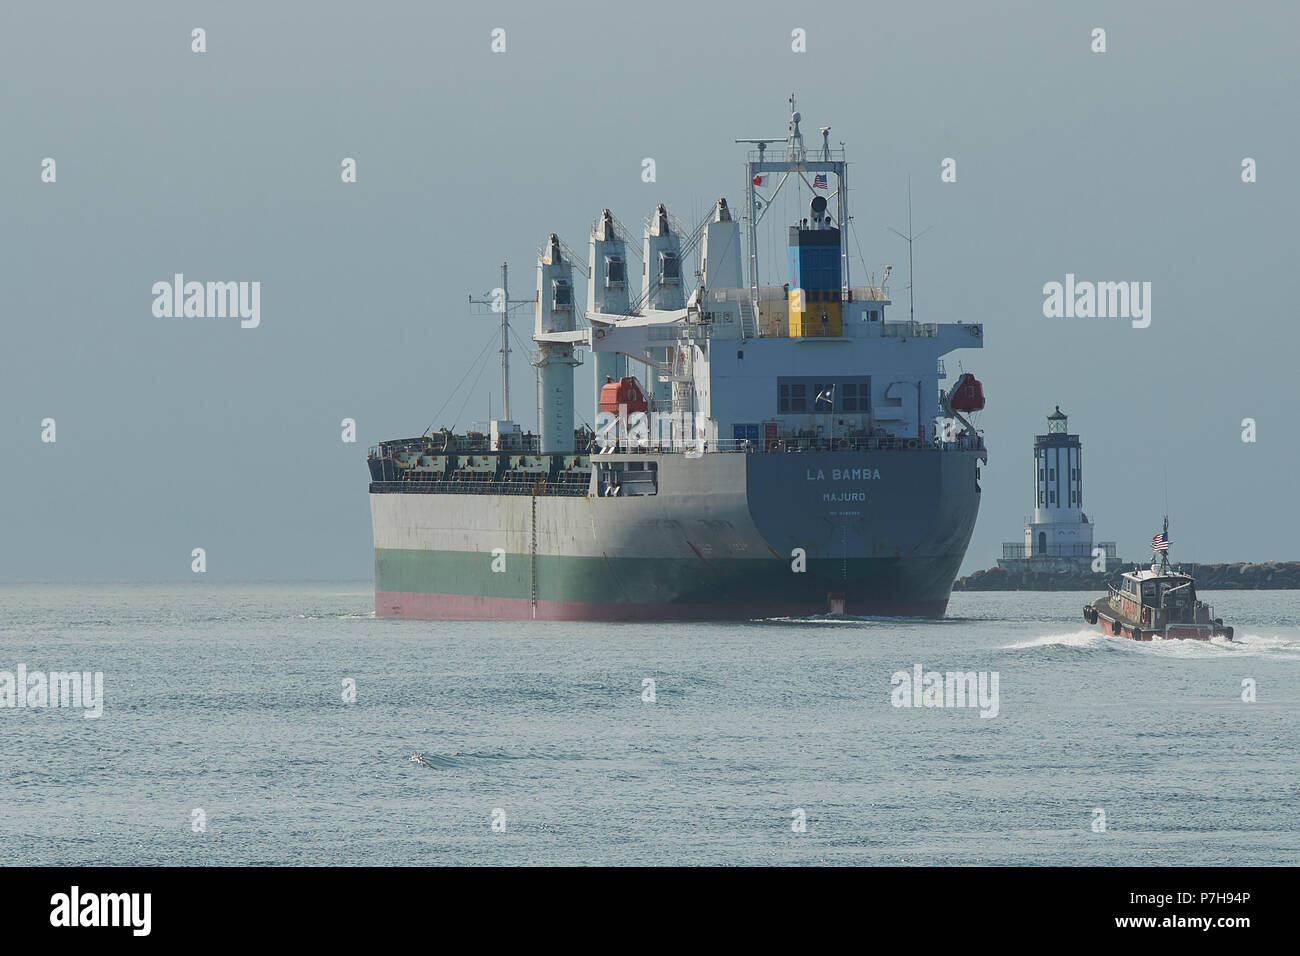 Harbor Pilot Boat Follows The Bulk Carrier, LA BAMBA, Under Way And Leaving The Port Of Los Angeles, California. The Angels Gate Lighthouse To Right. Stock Photo